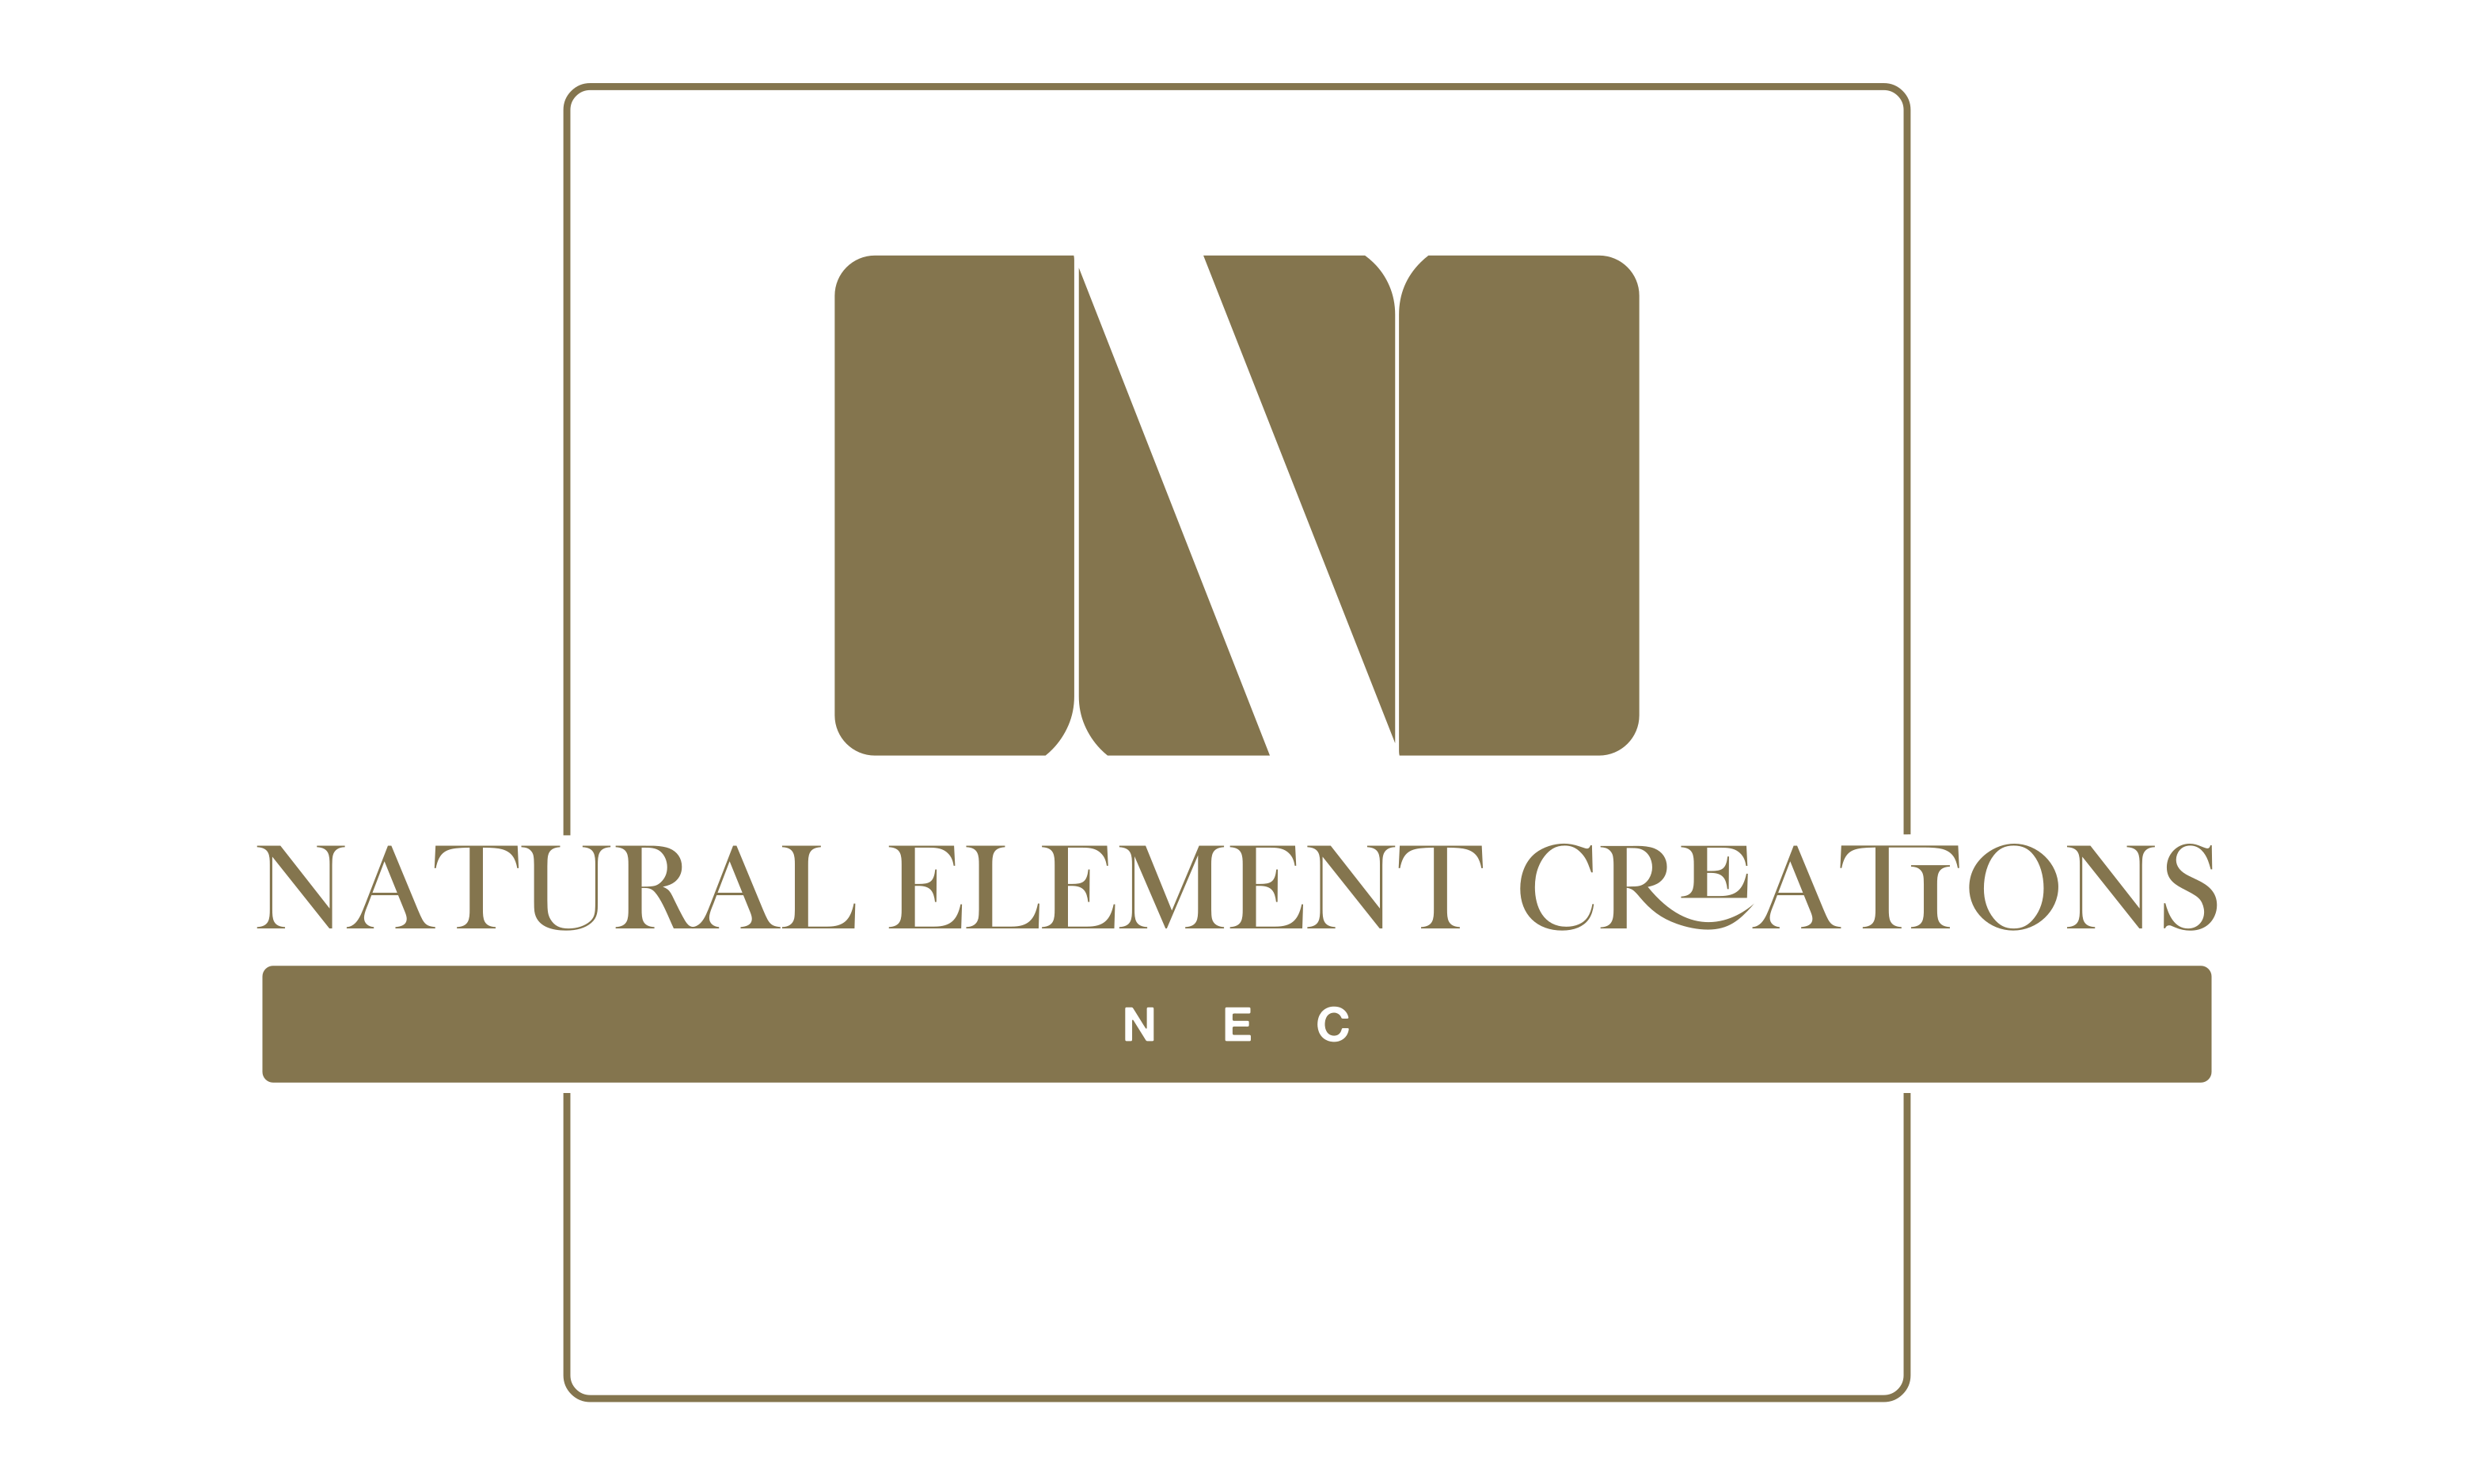 Natural Element Creations